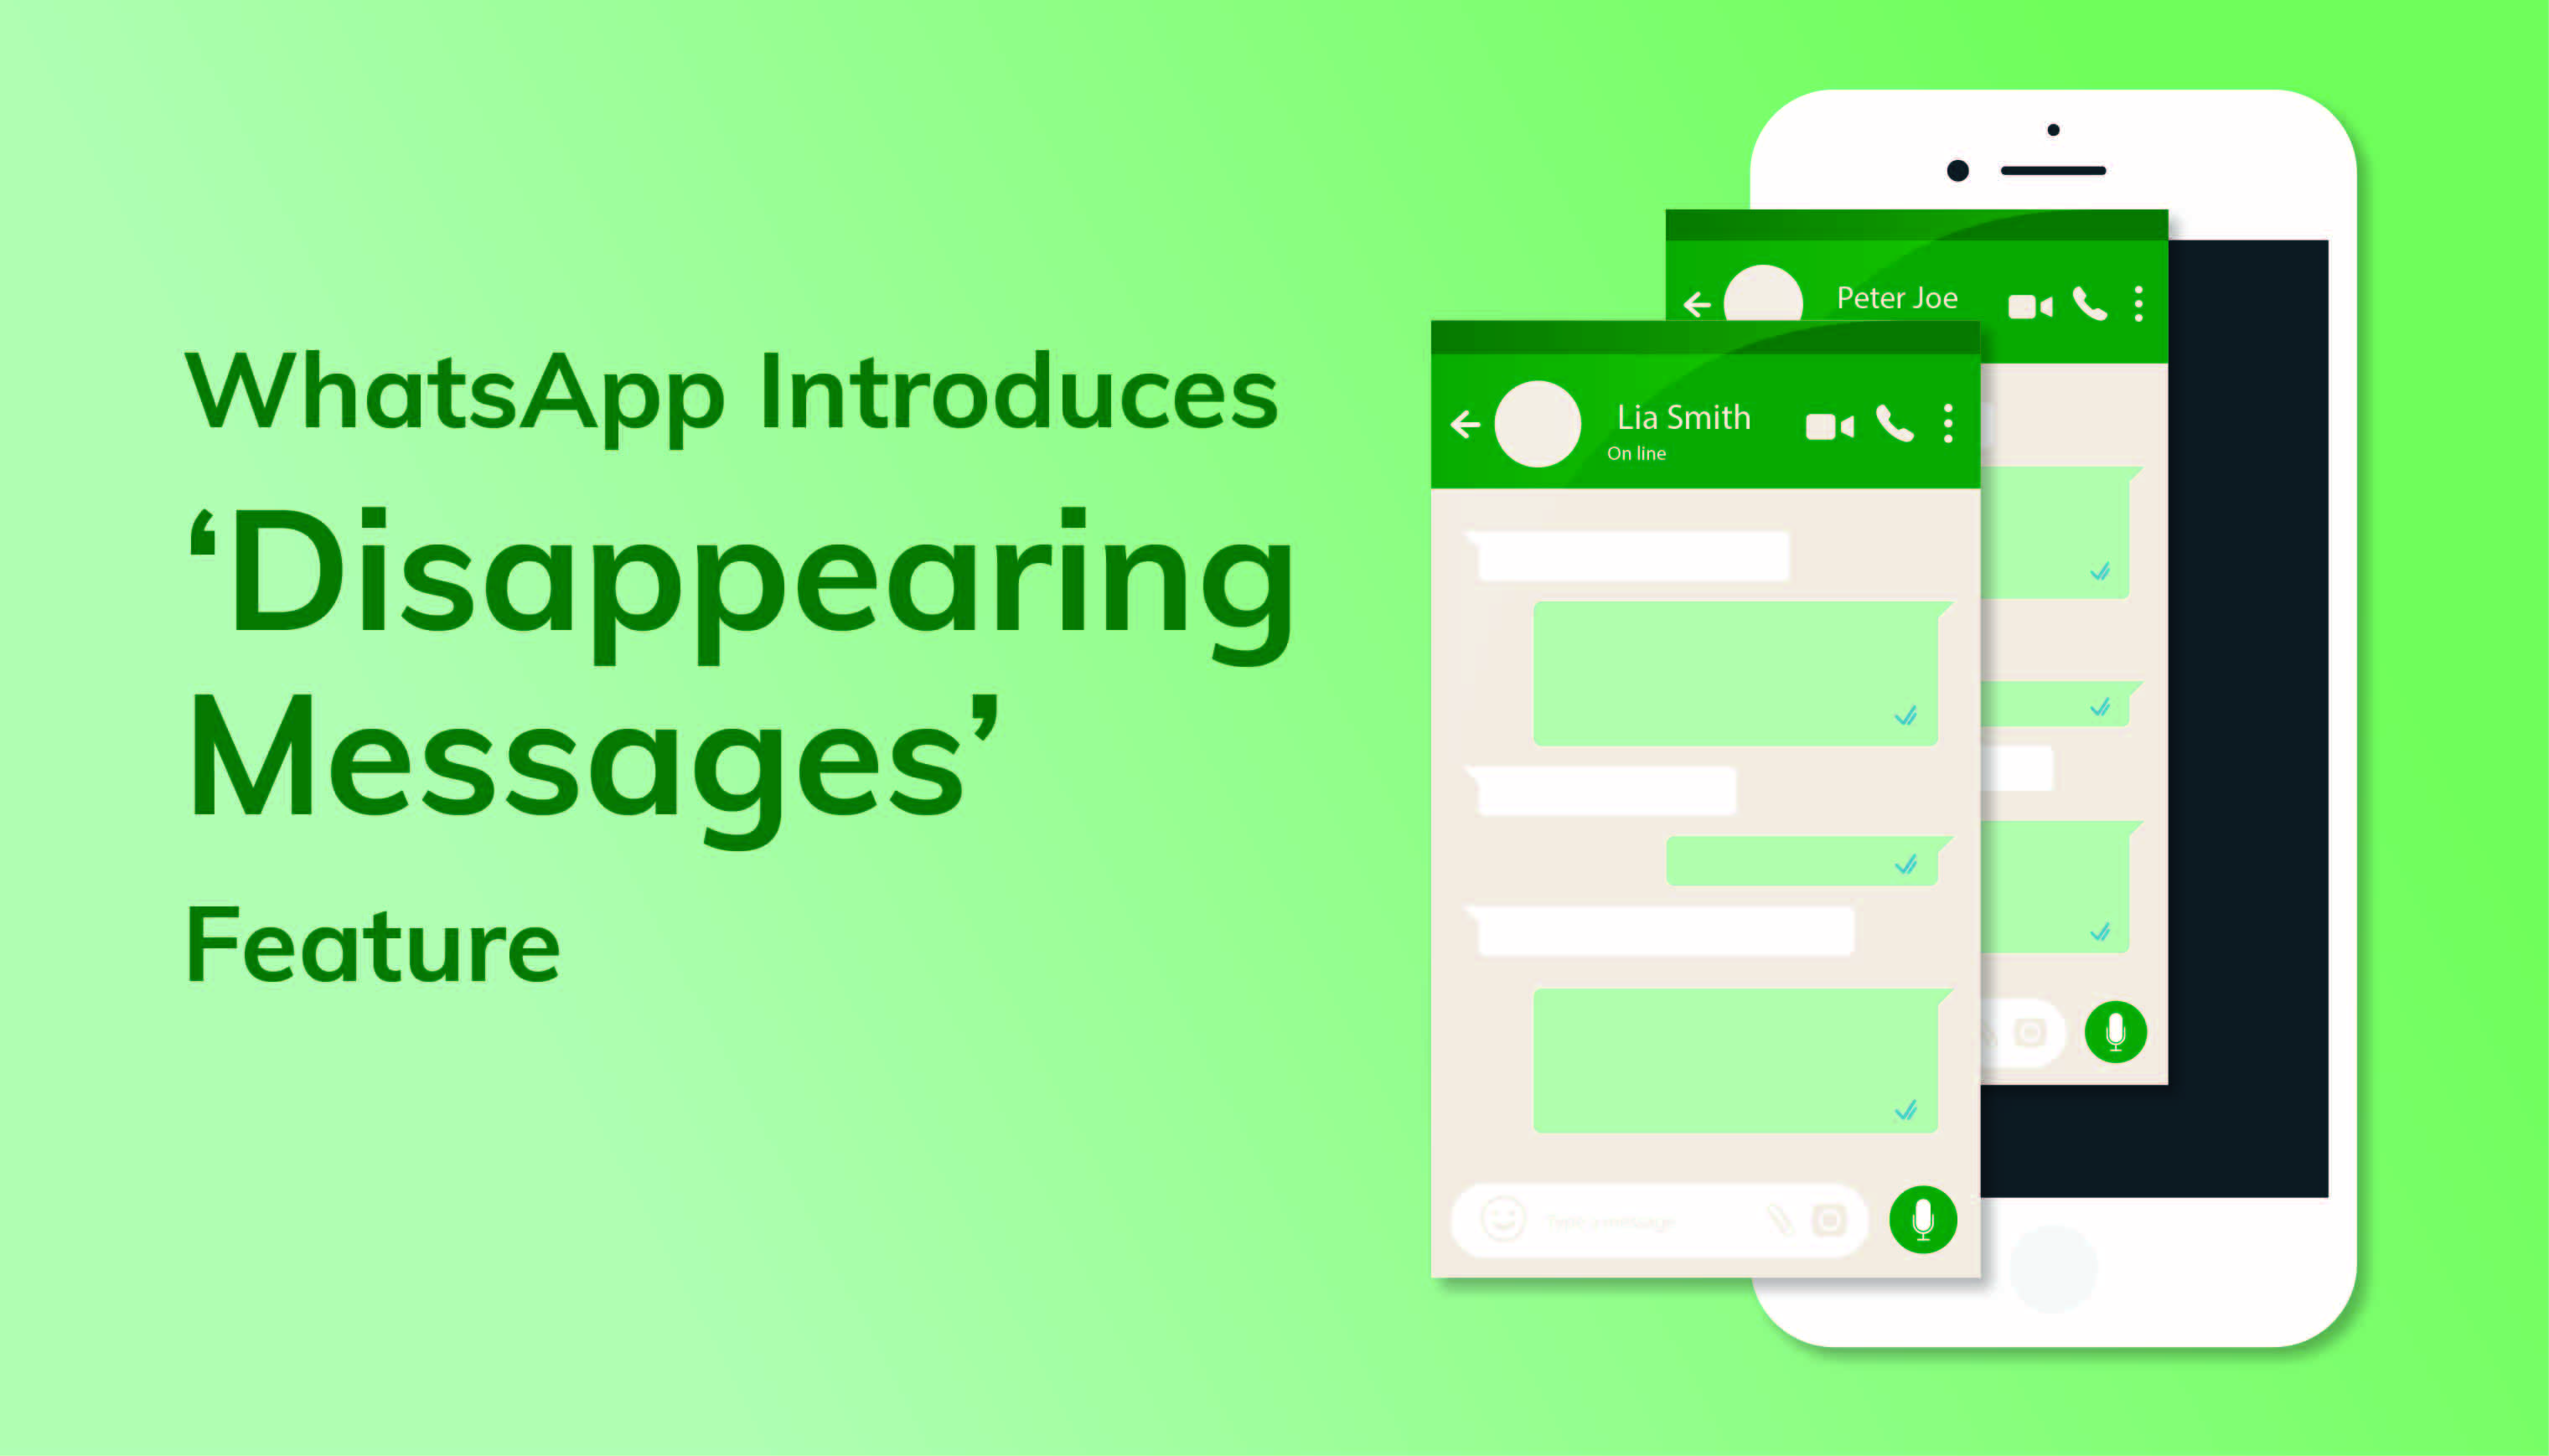 WhatsApp Introduces ‘Disappearing Messages’ feature